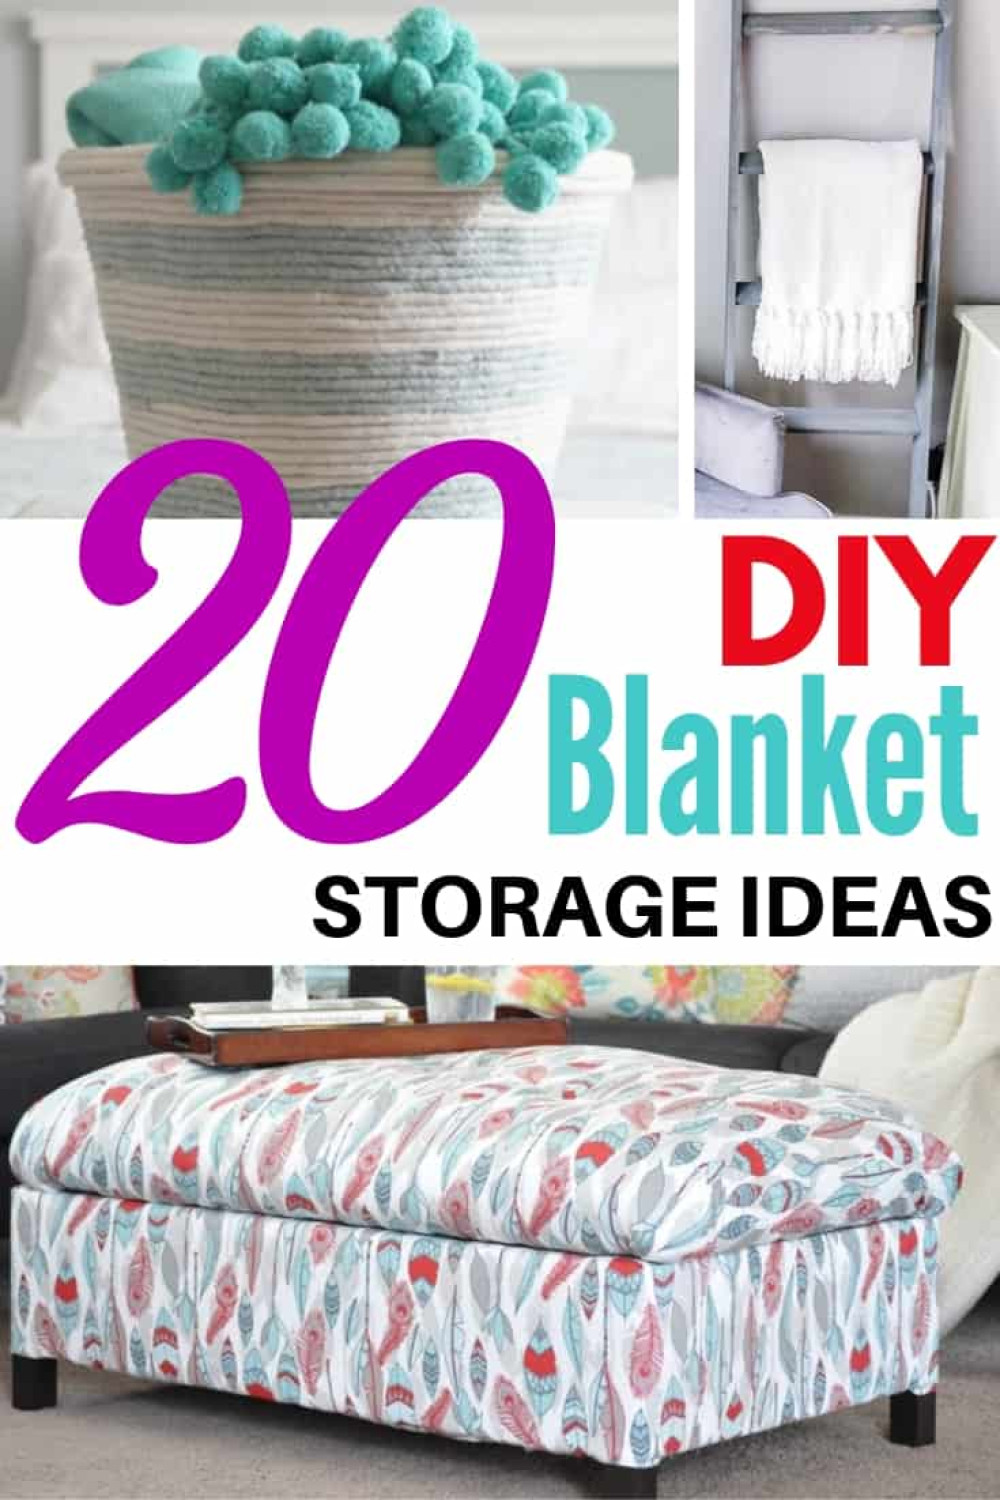 Smart Blanket Storage Ideas for Every Room - The Handyman